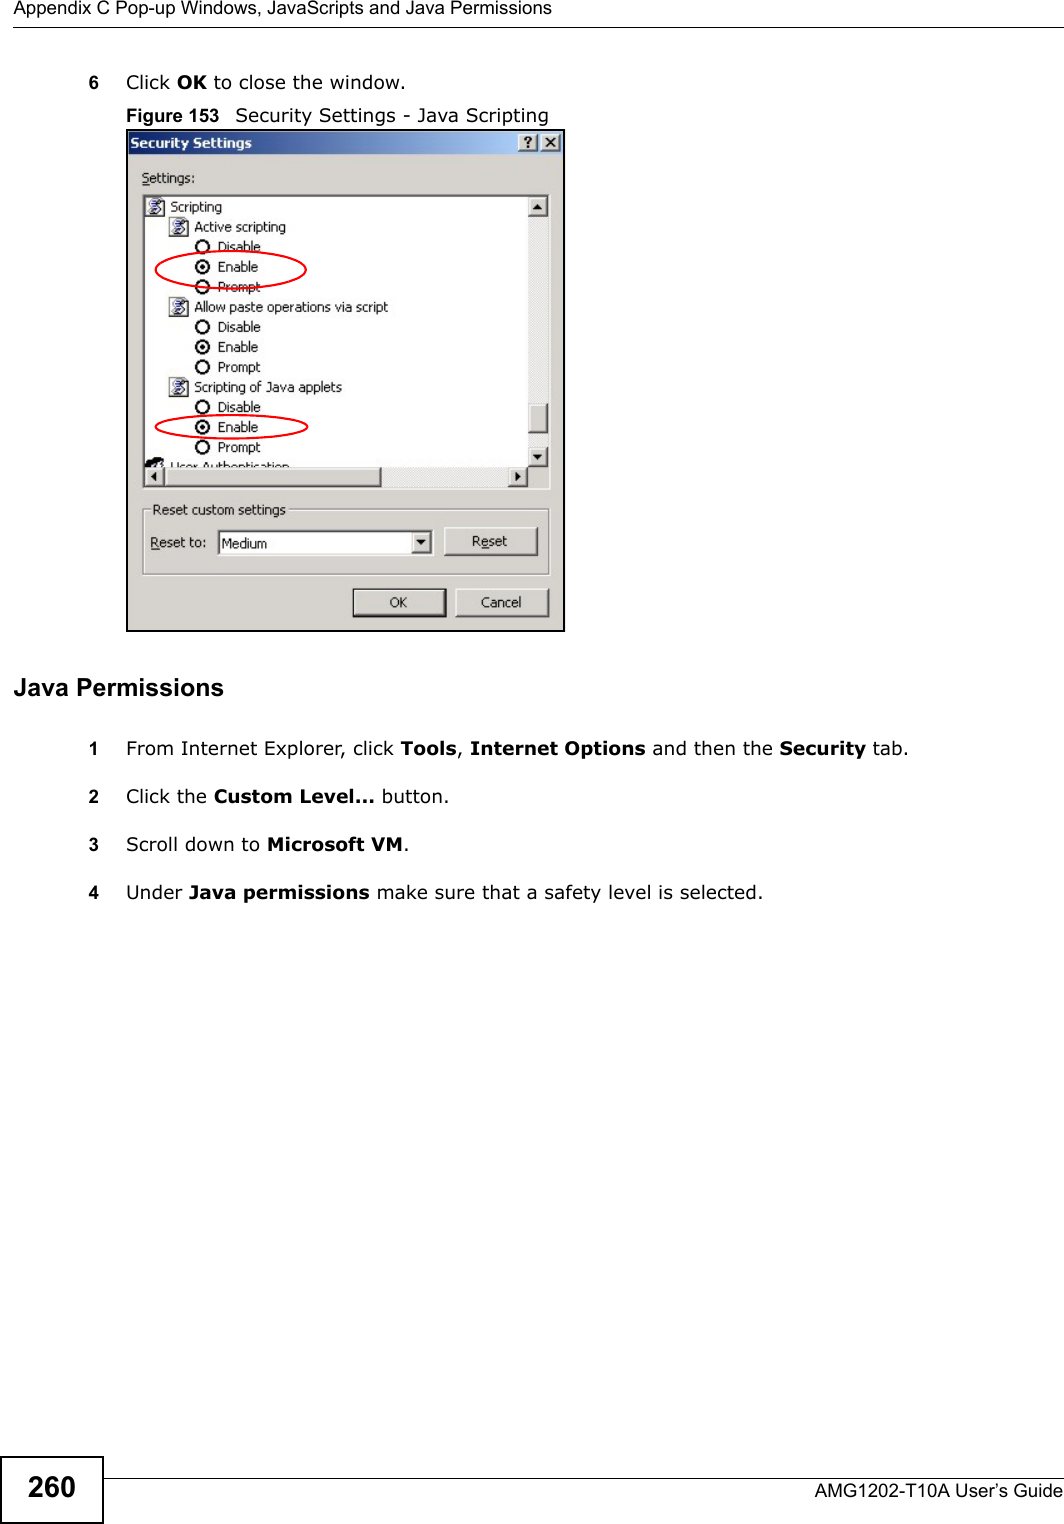 Appendix C Pop-up Windows, JavaScripts and Java PermissionsAMG1202-T10A User’s Guide2606Click OK to close the window.Figure 153   Security Settings - Java ScriptingJava Permissions1From Internet Explorer, click Tools, Internet Options and then the Security tab. 2Click the Custom Level... button. 3Scroll down to Microsoft VM. 4Under Java permissions make sure that a safety level is selected.